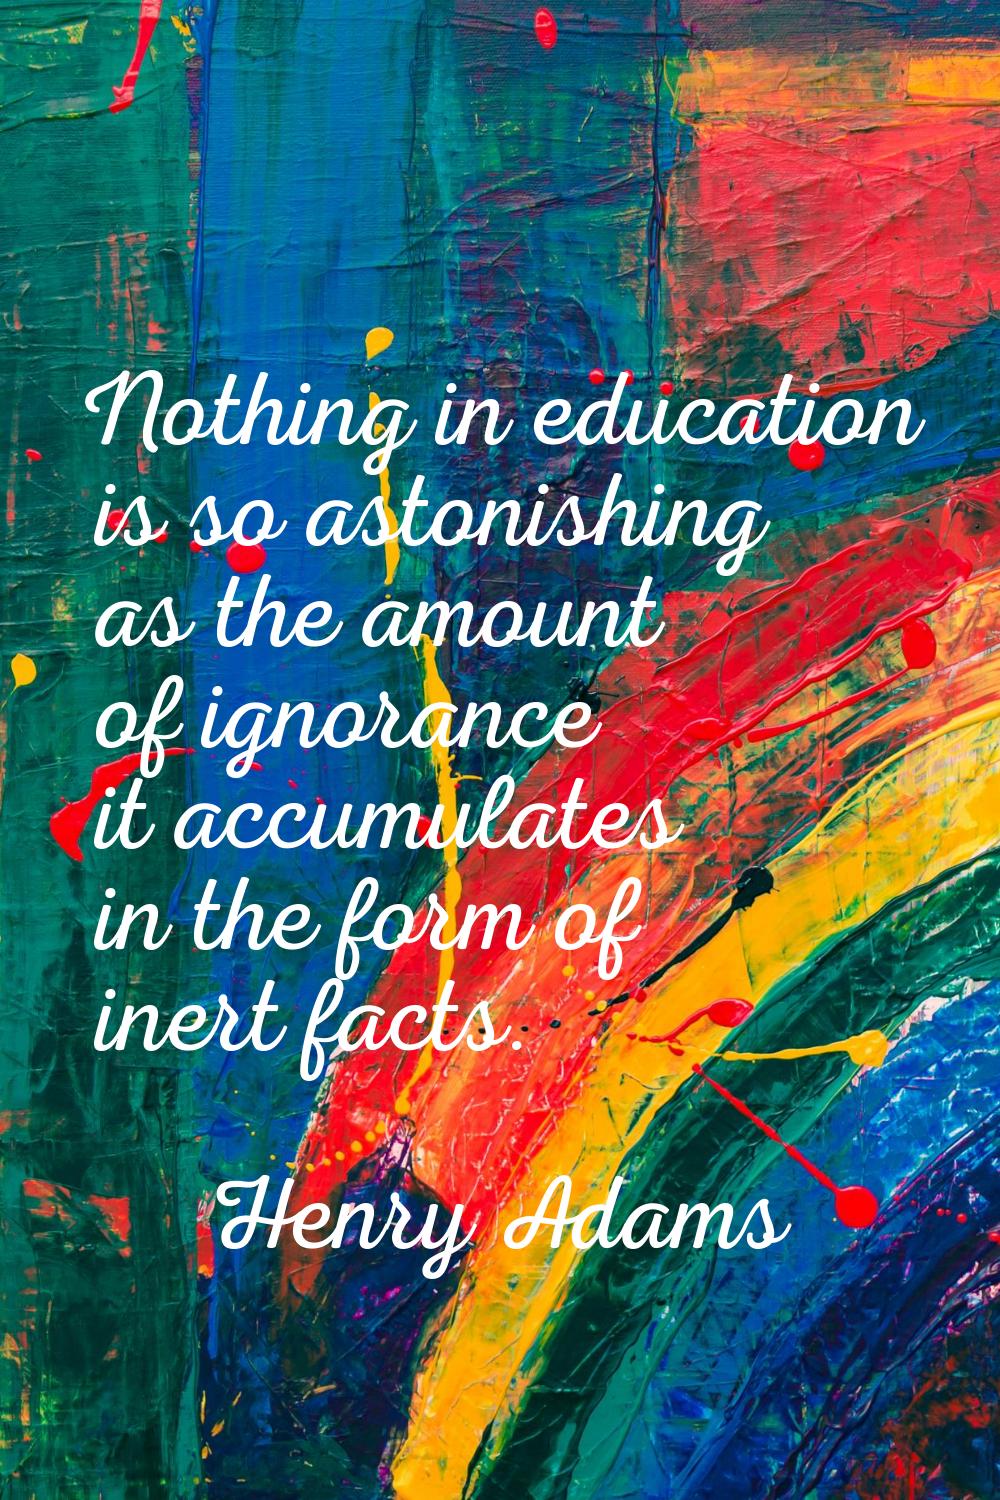 Nothing in education is so astonishing as the amount of ignorance it accumulates in the form of ine